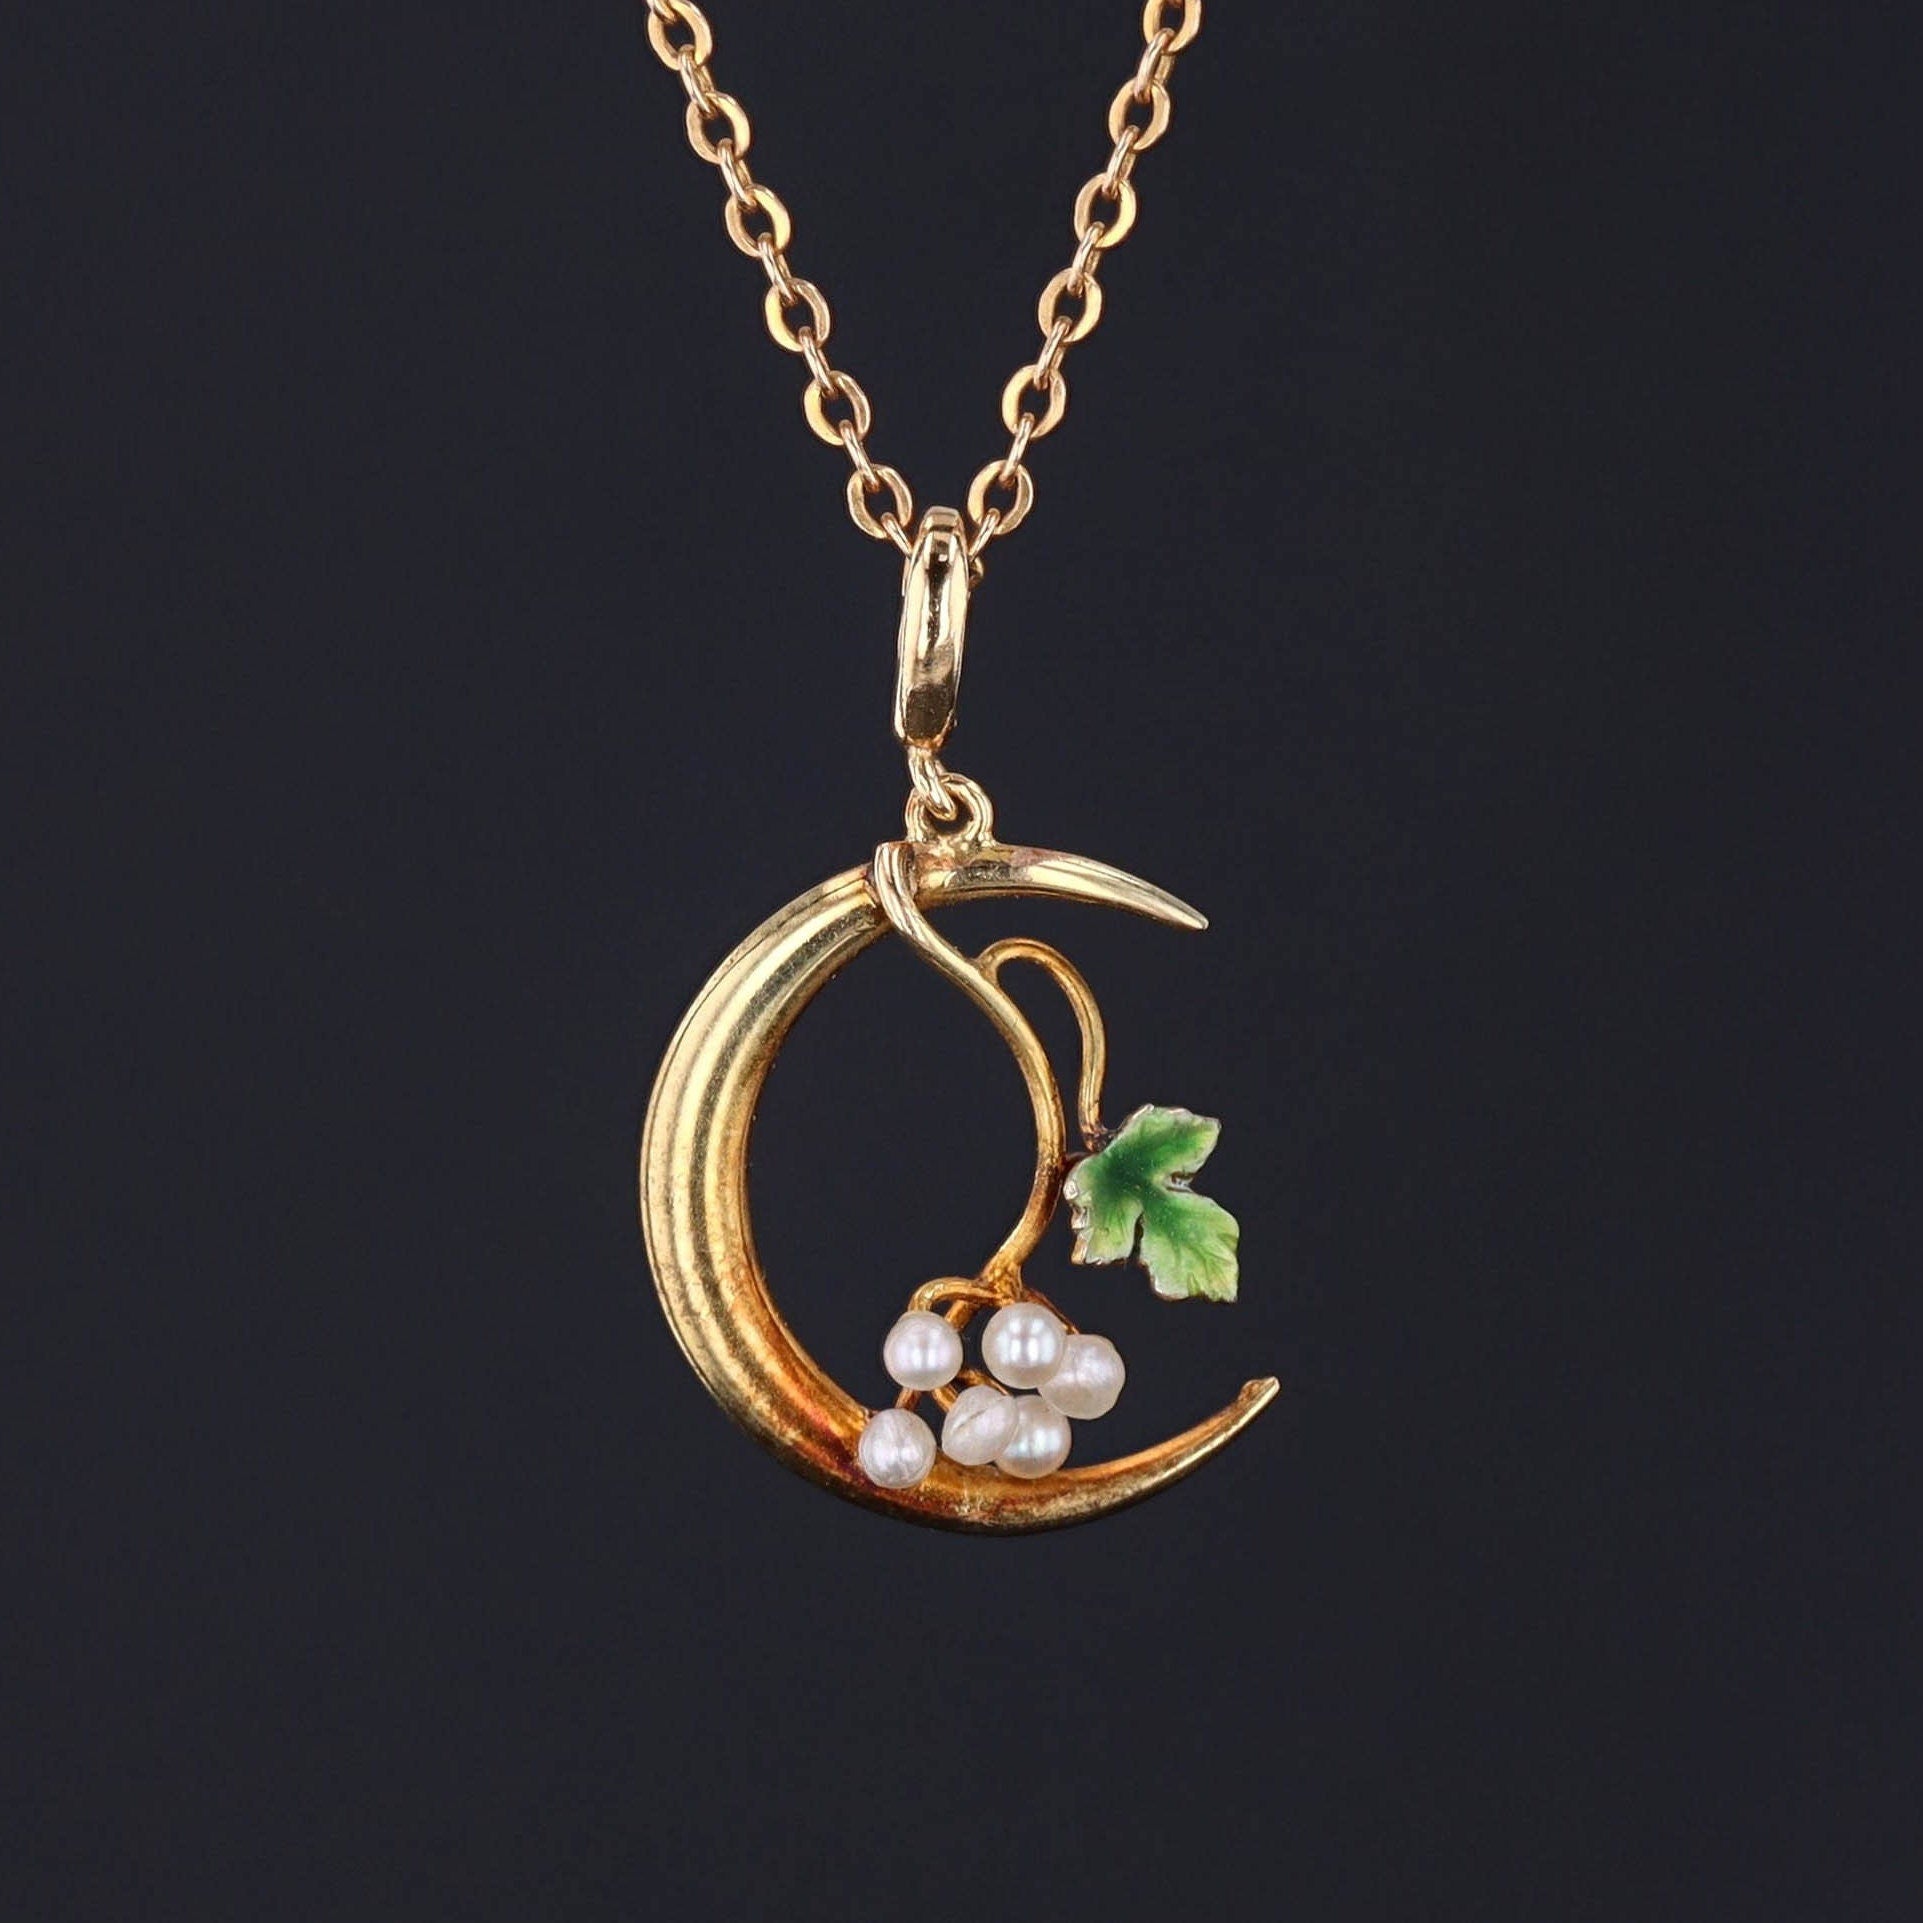 Antique Crescent Moon and Grapes Pendant of 14k Gold